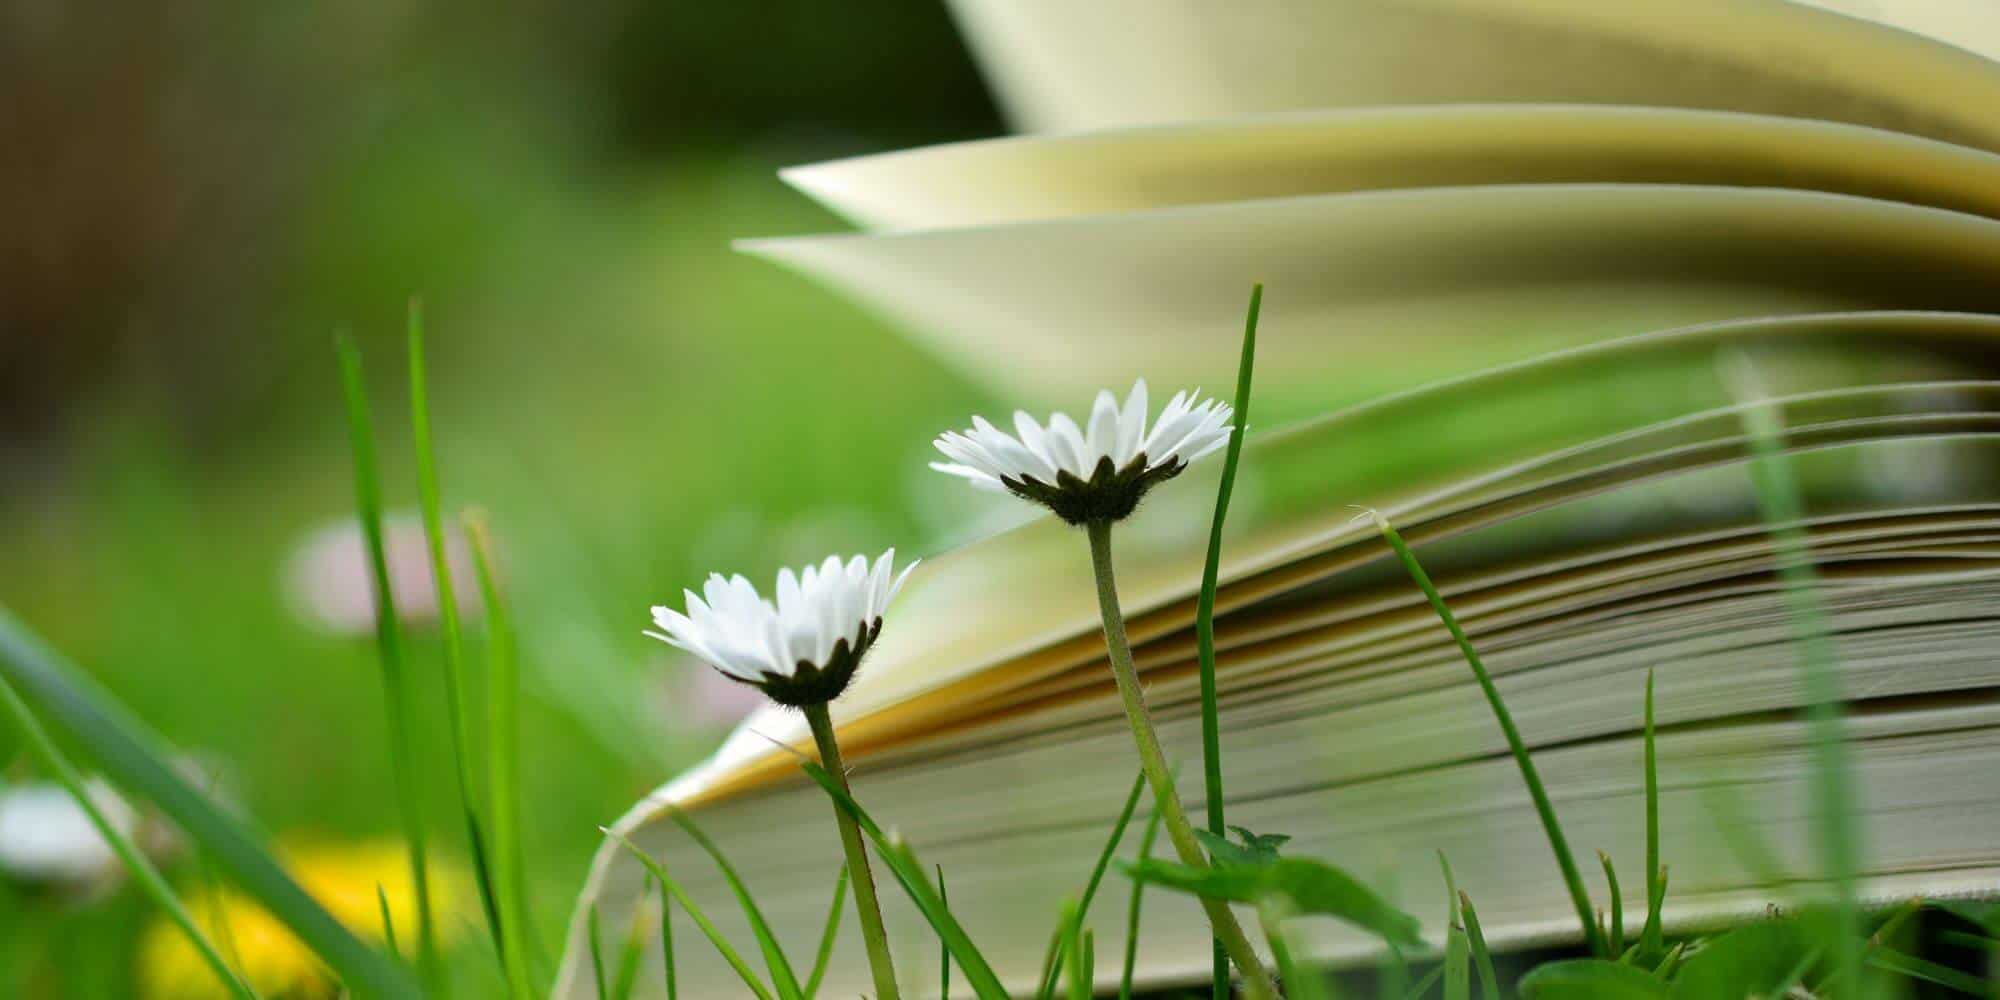 Book laying open in the field